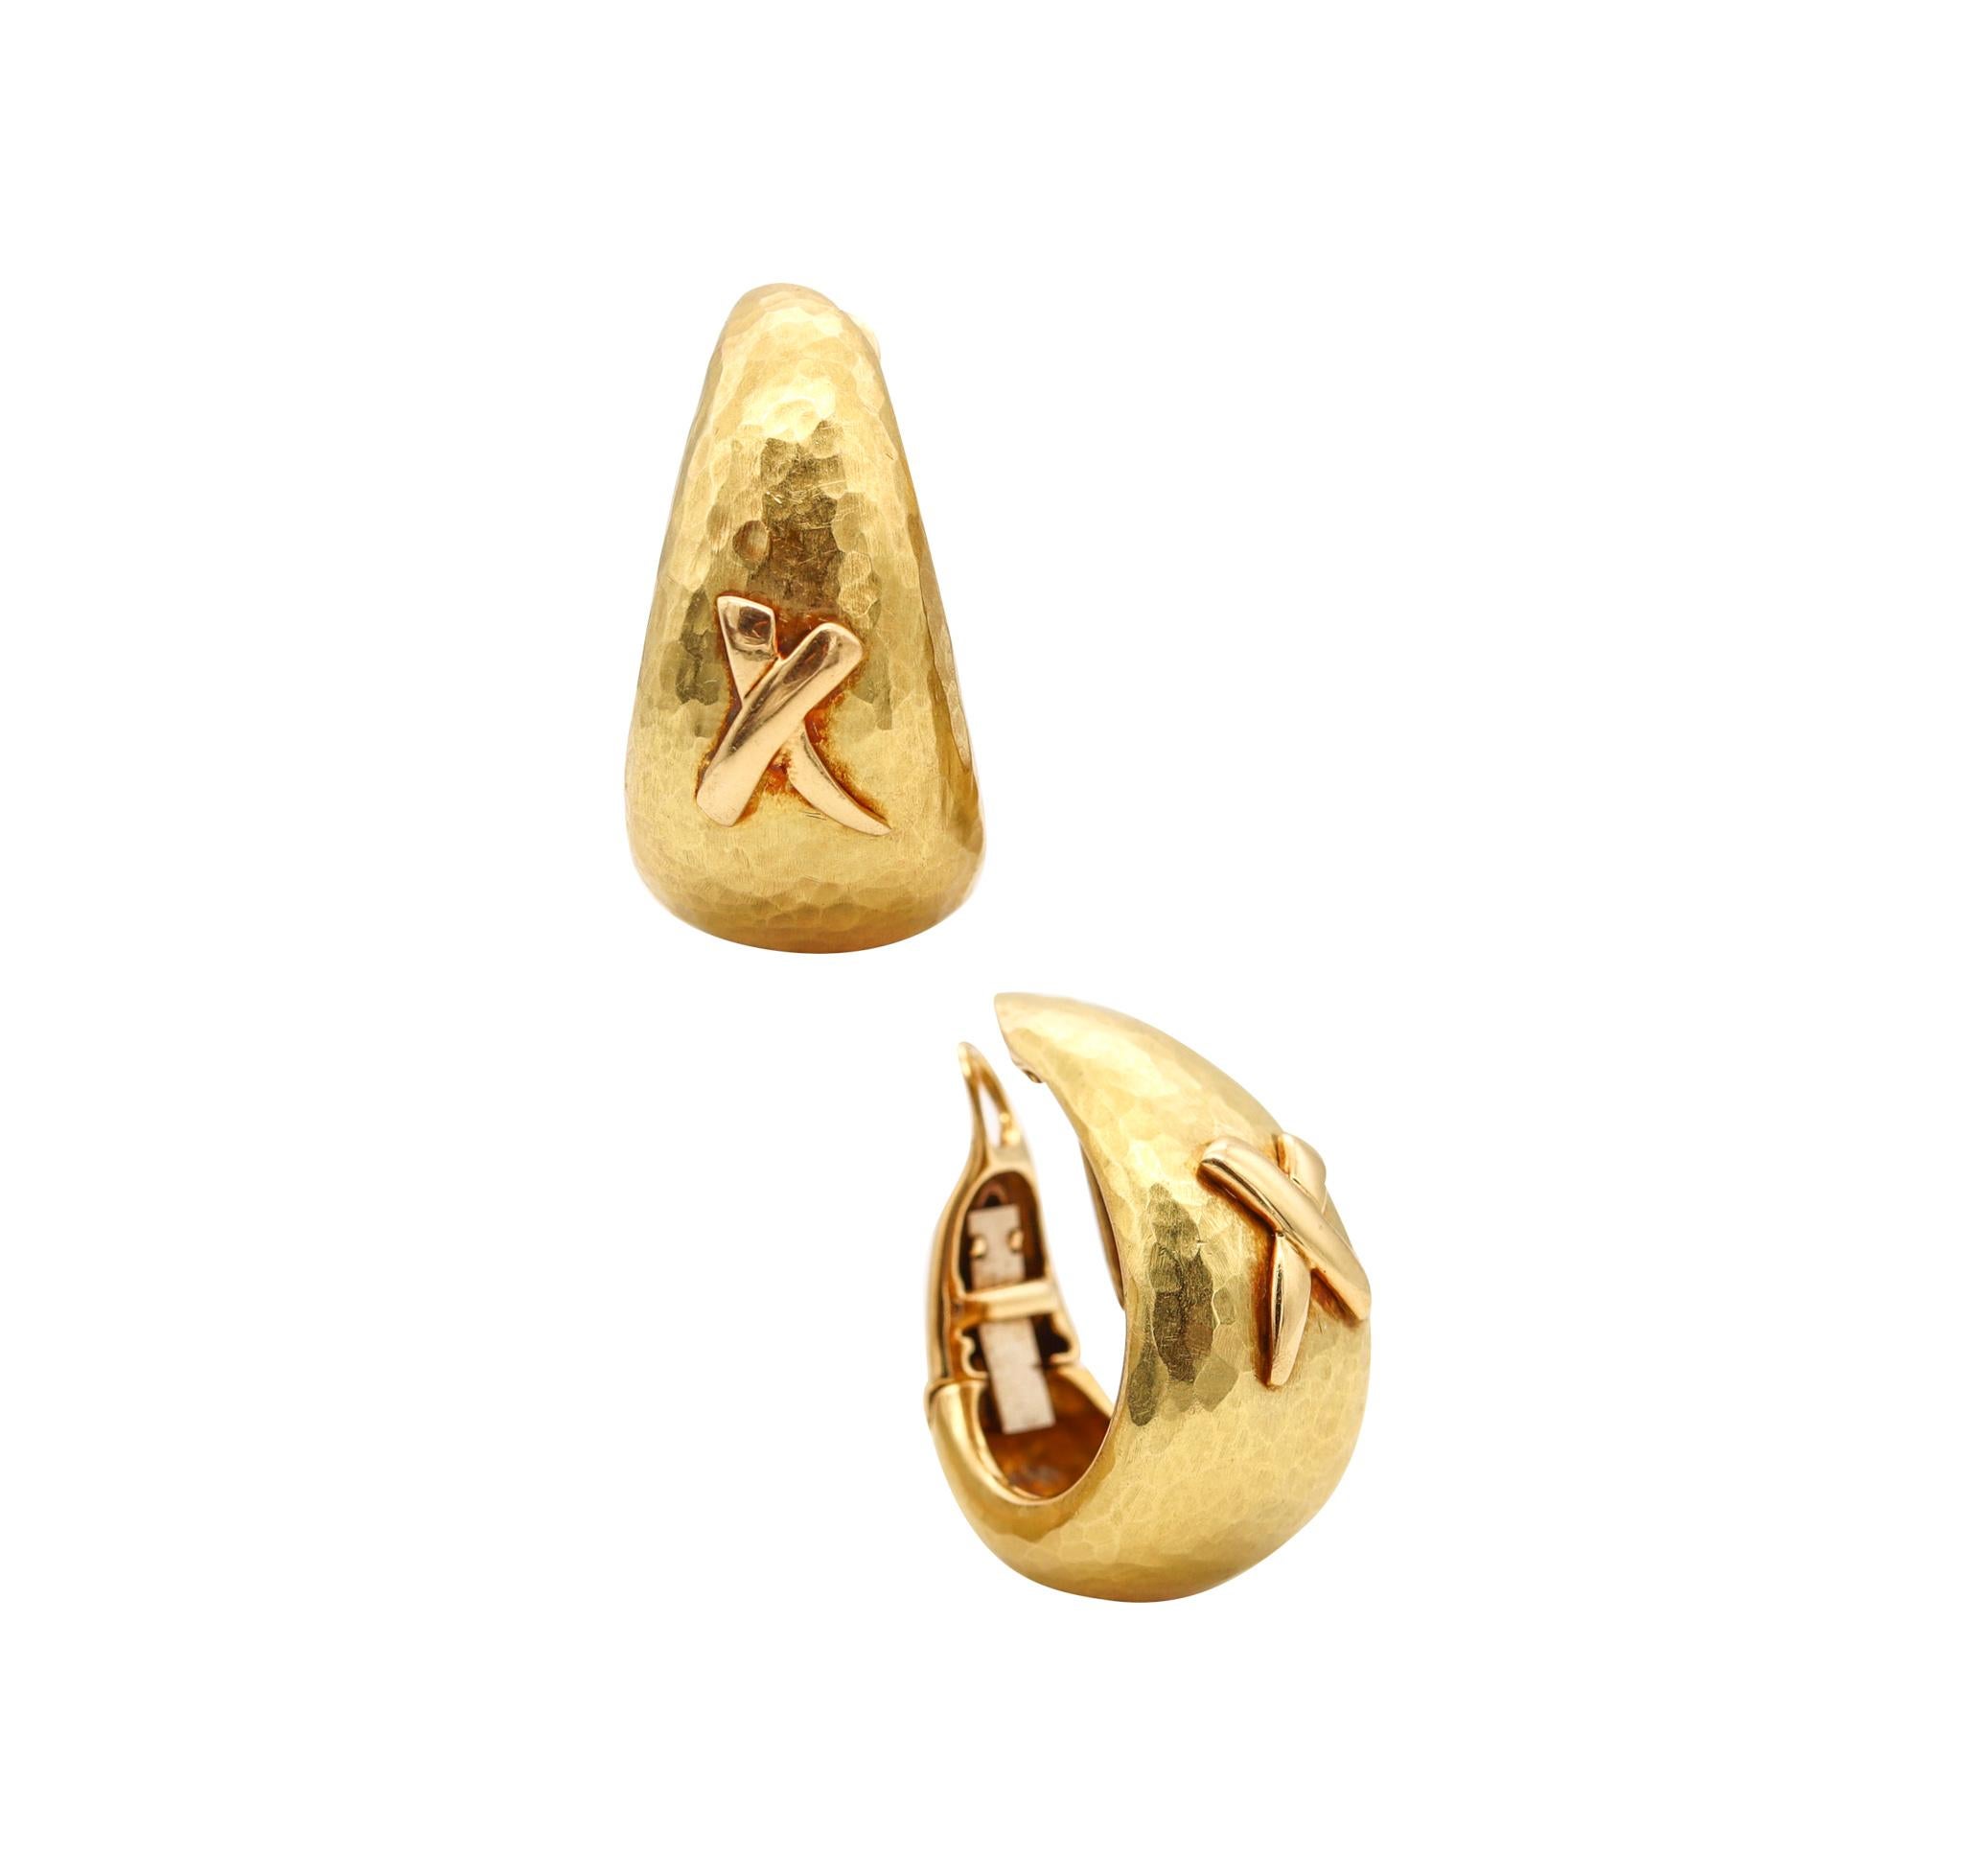 Modernist Tiffany & Co. by Paloma Picasso Pair of Graffiti Earrings in Hammered 18Kt Gold For Sale